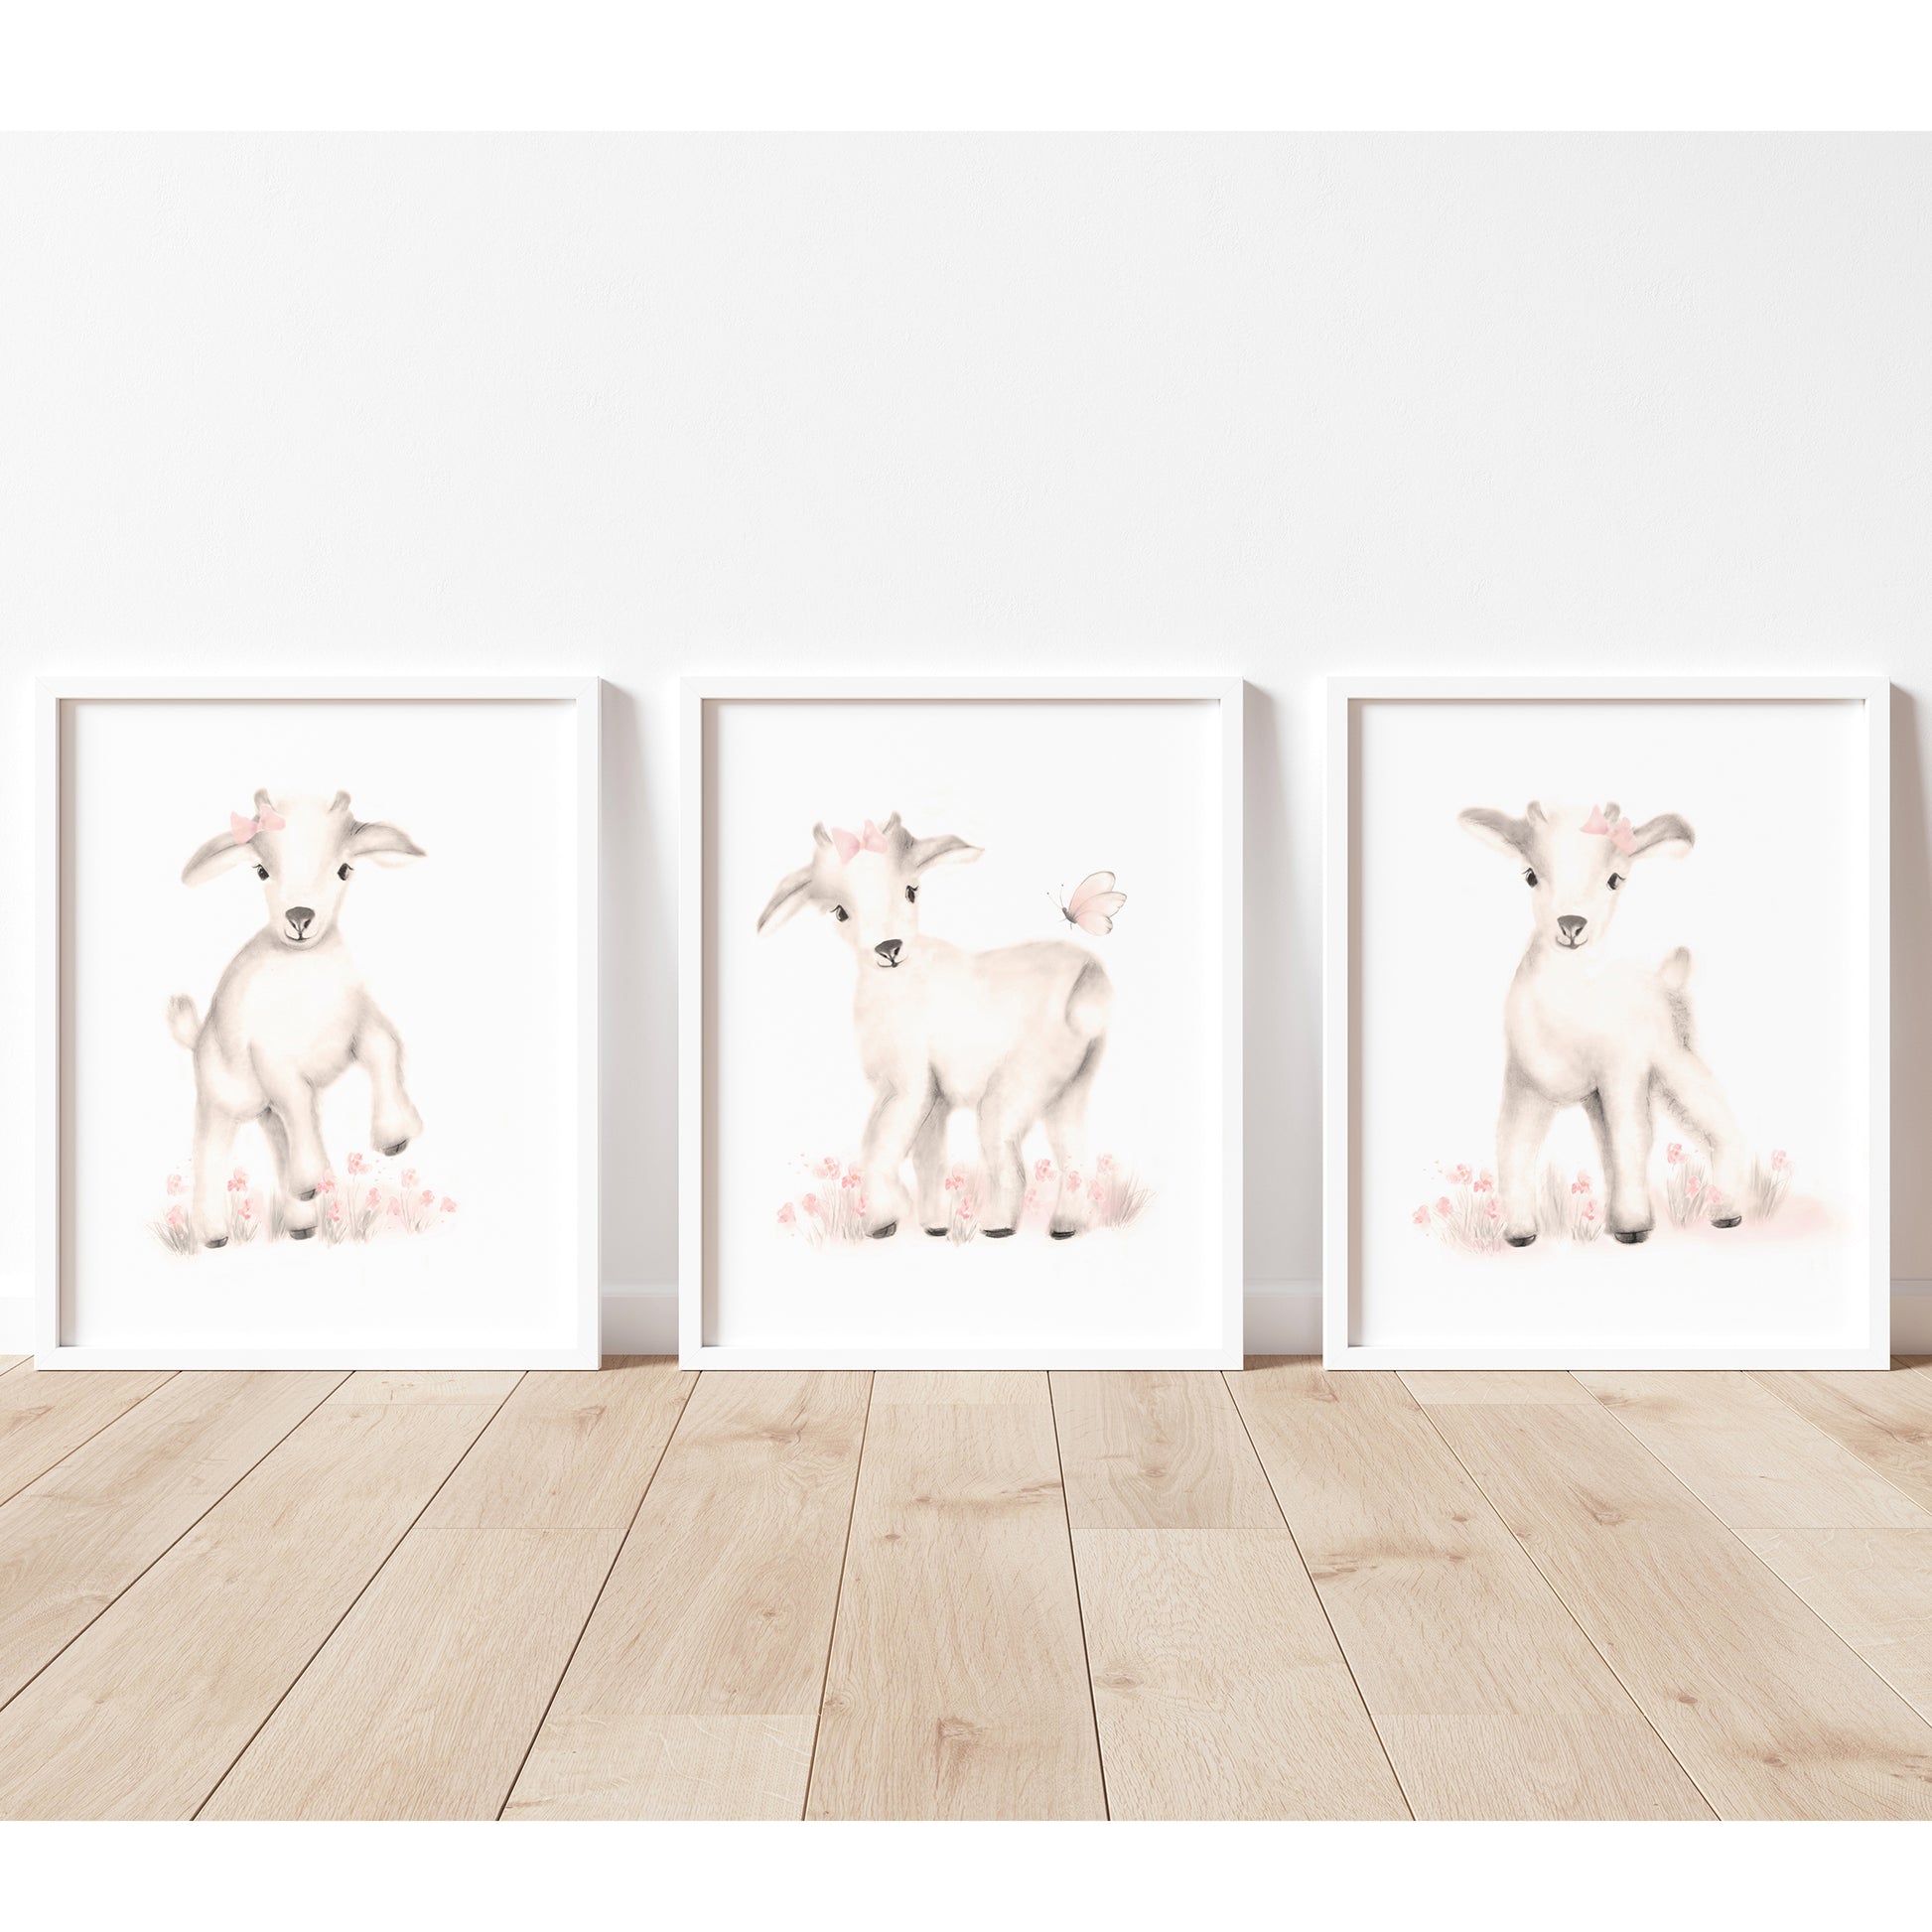 Set of three goat drawings in shades of sepia and sweet blush - Studio Q - Art by Nicky Quartermaine Scott